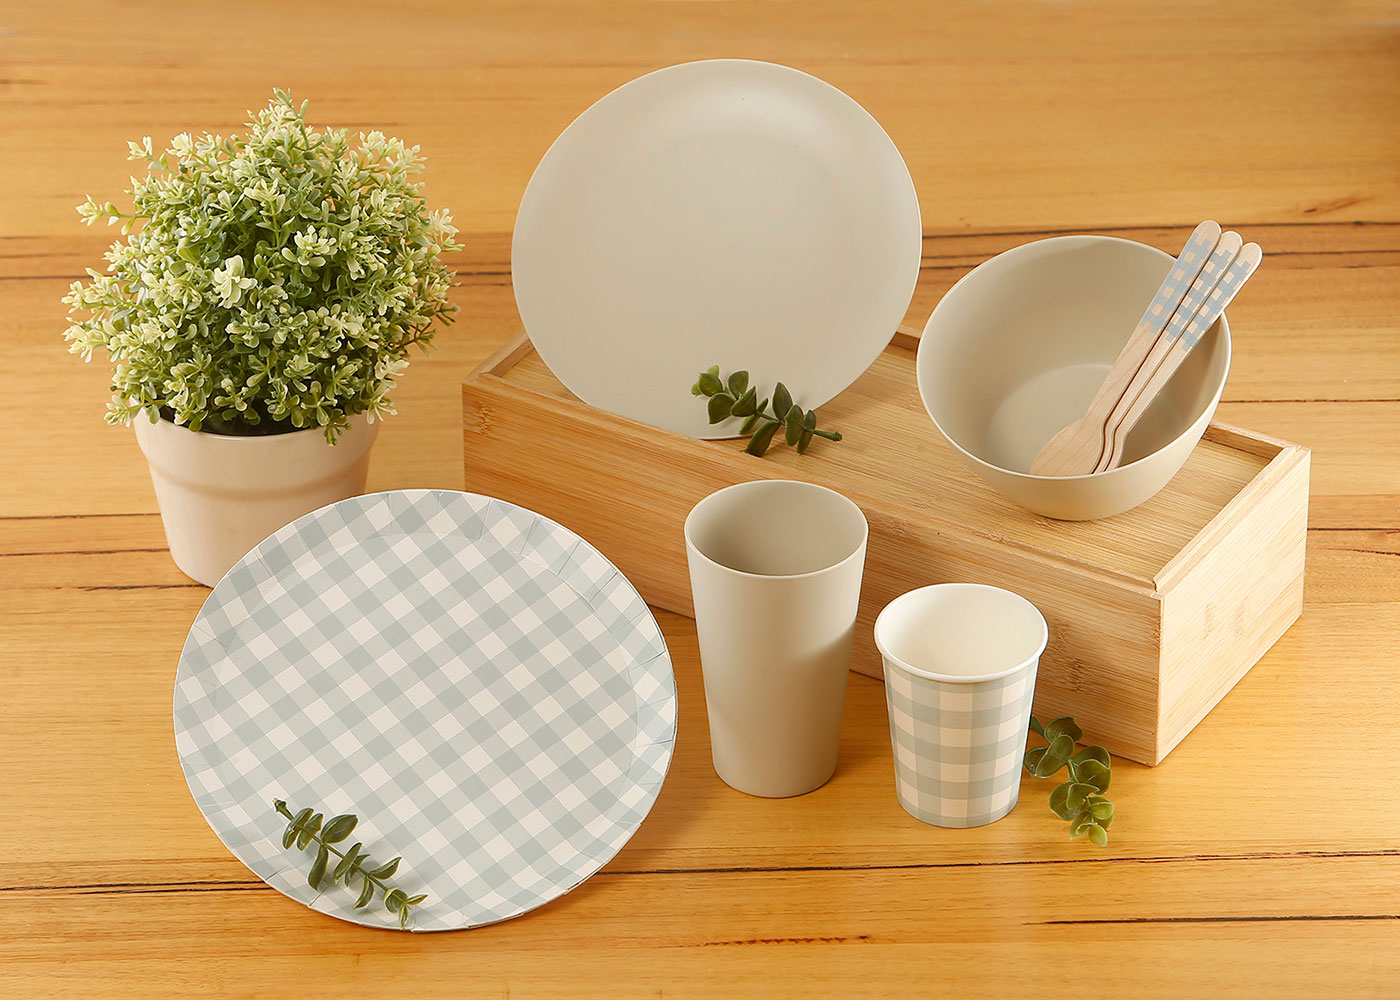 Some of Coles' new reusable and single-use tableware range